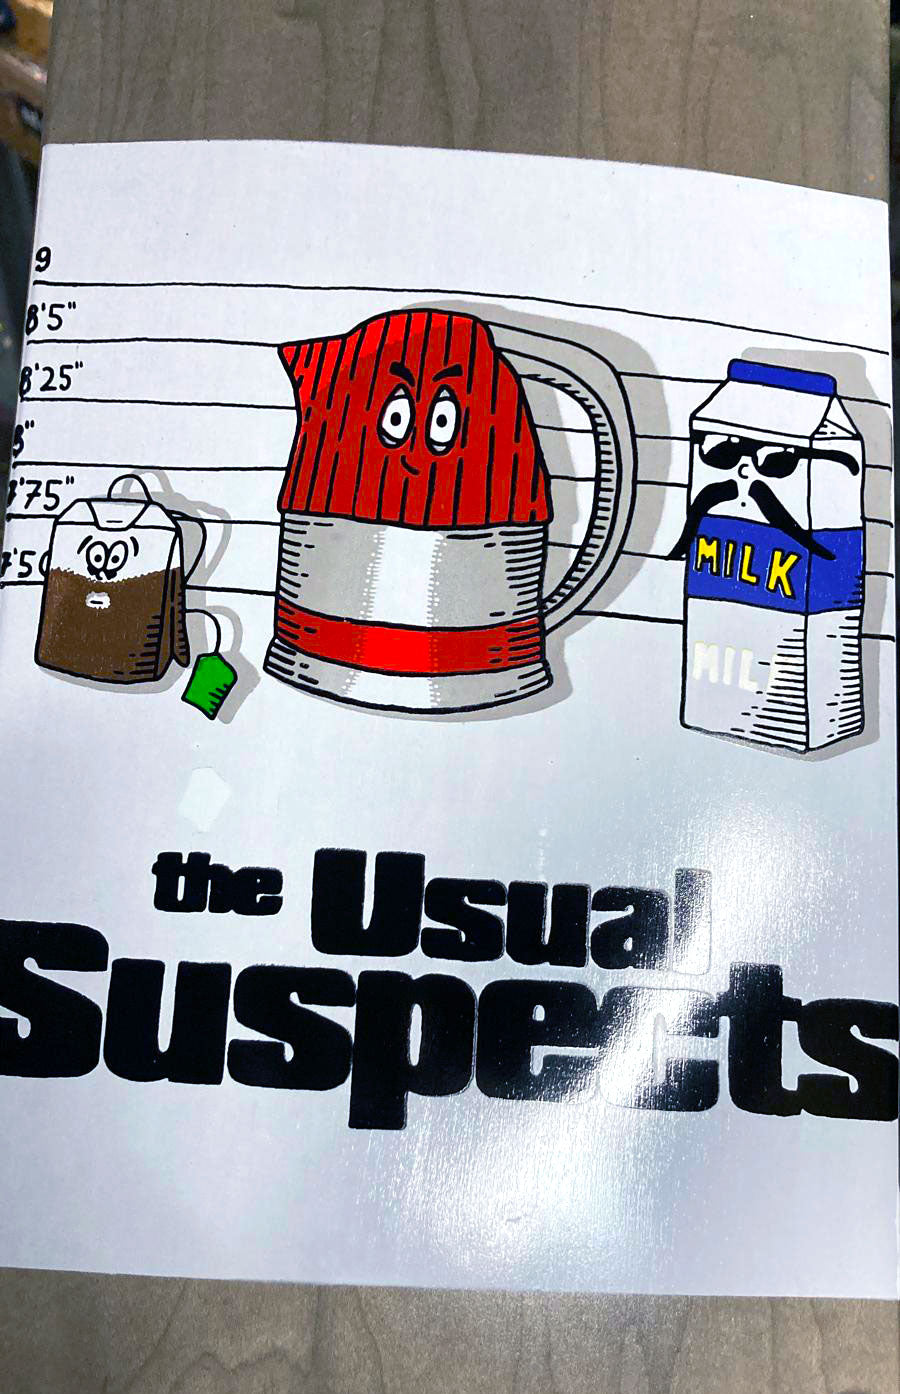 Lovenskate ‘THE USUAL SUSPECTS’ 8.25 Deck